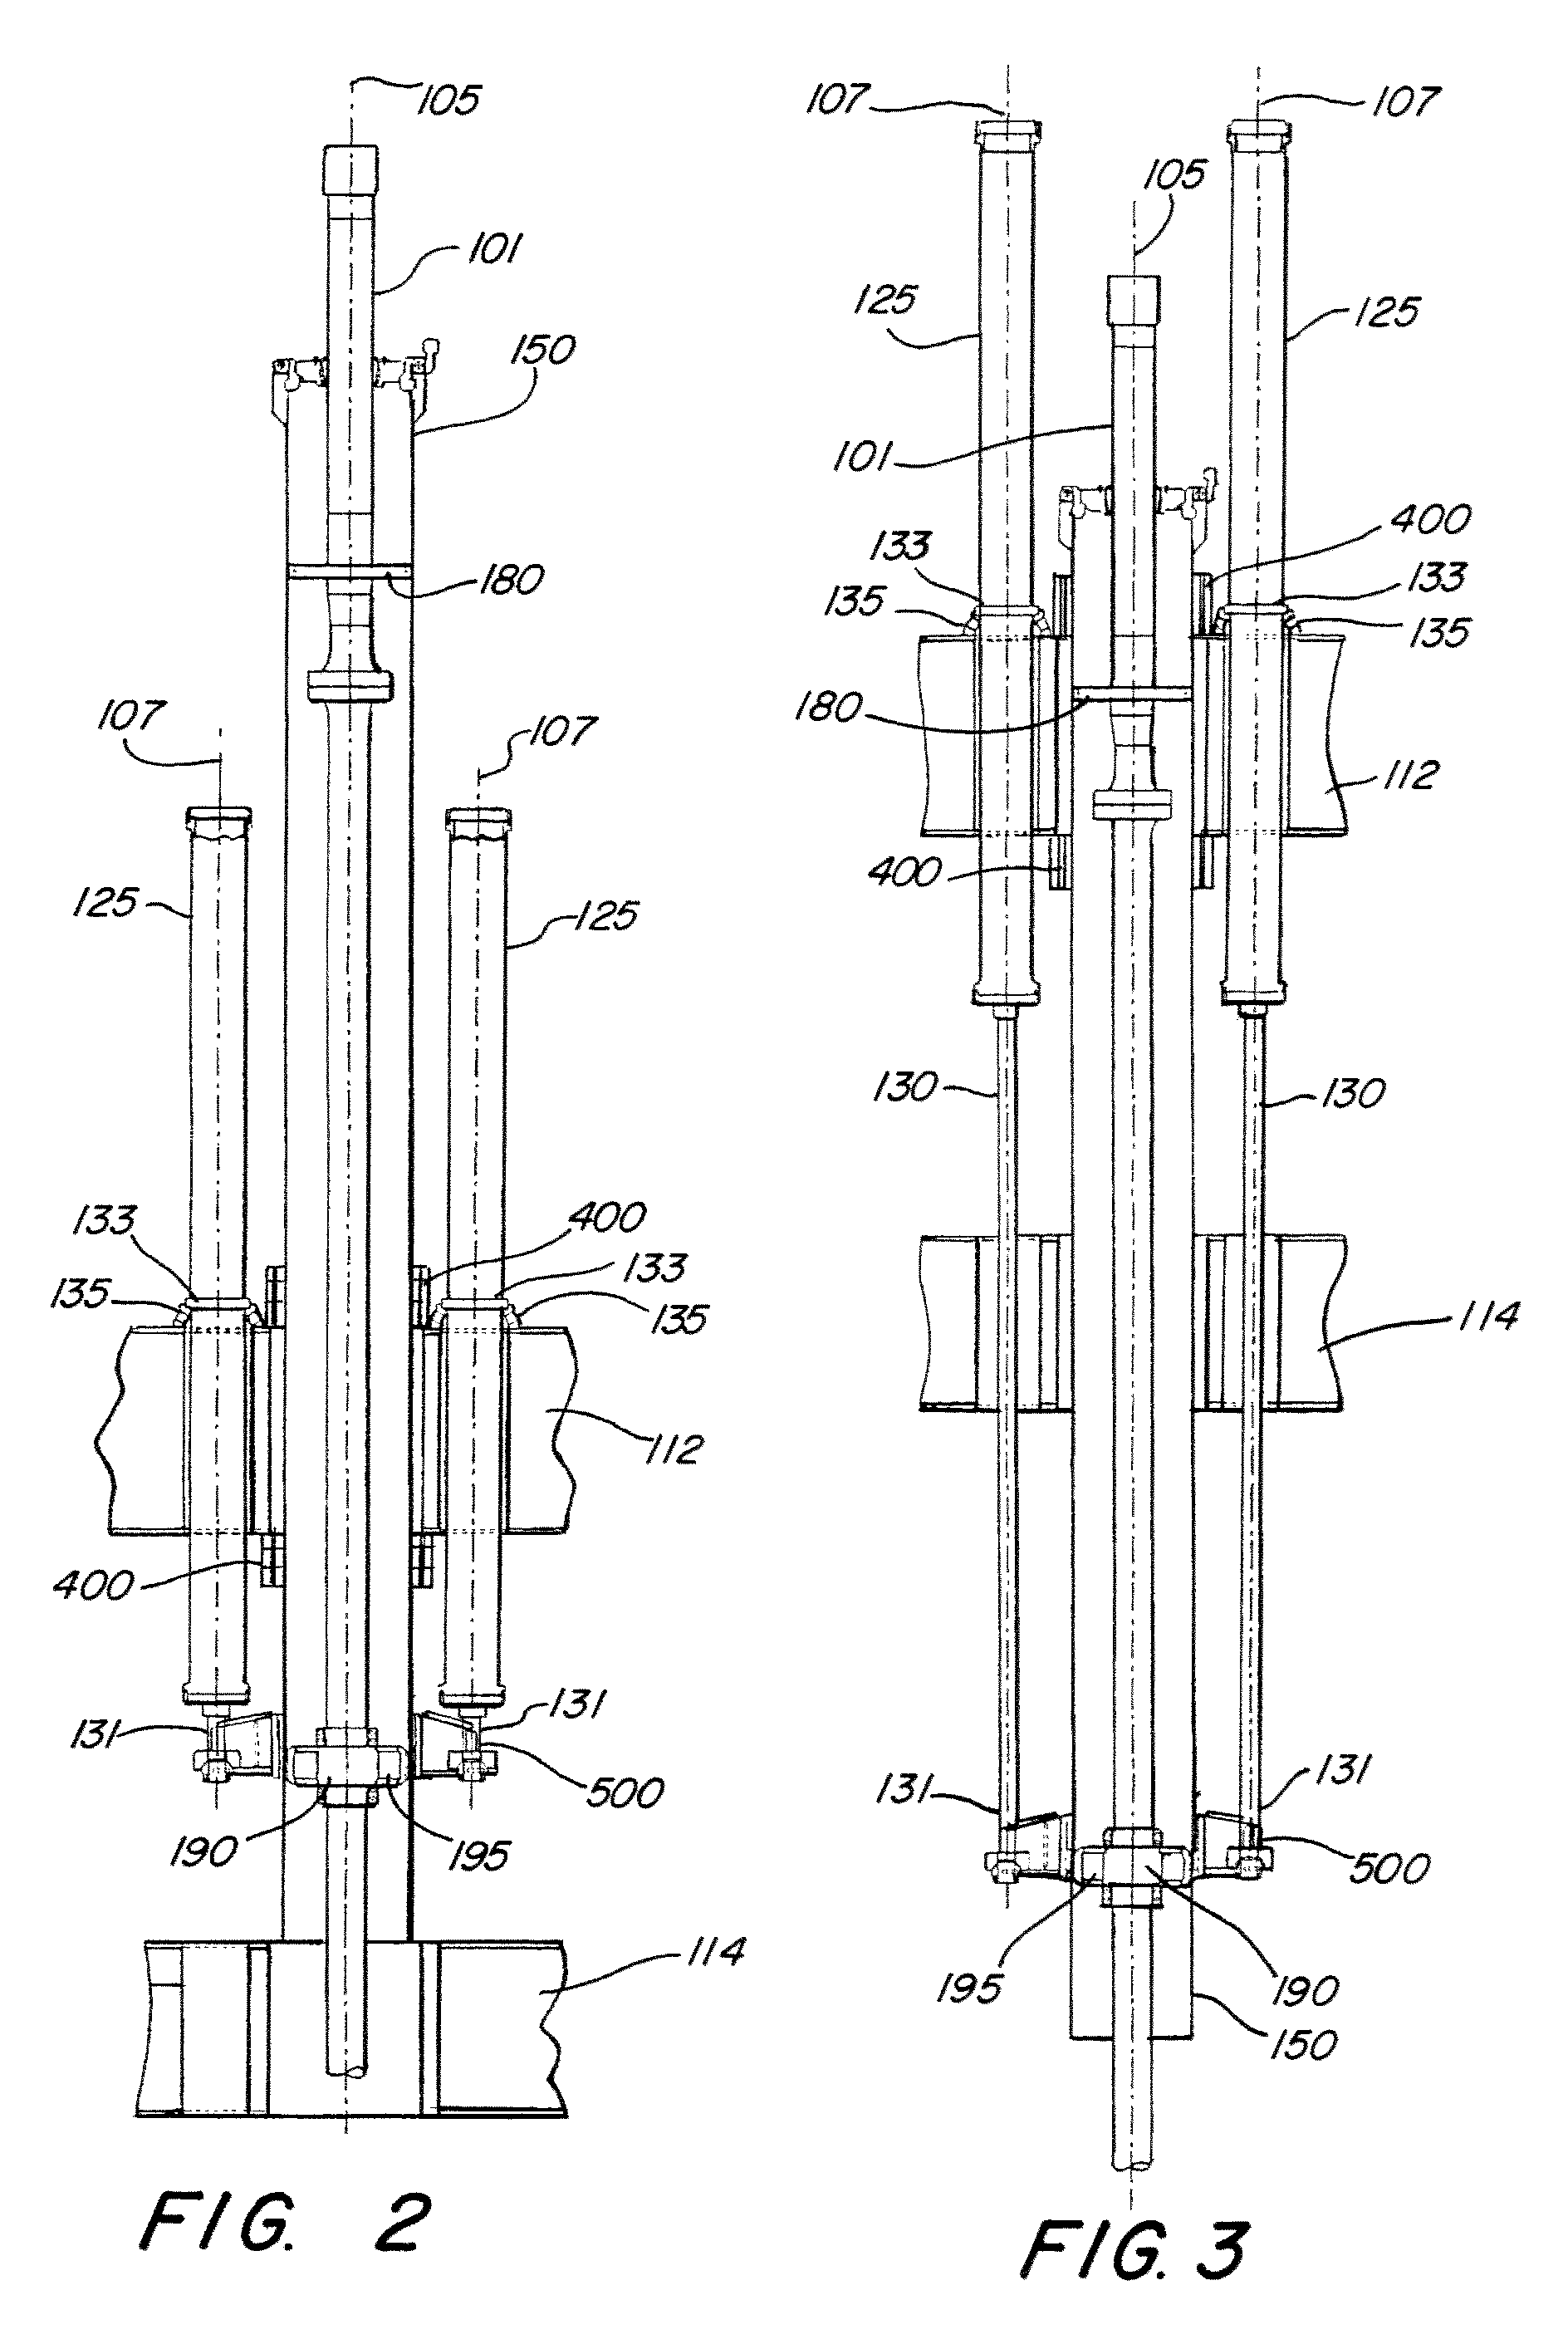 Pull-style tensioner system for a top-tensioned riser